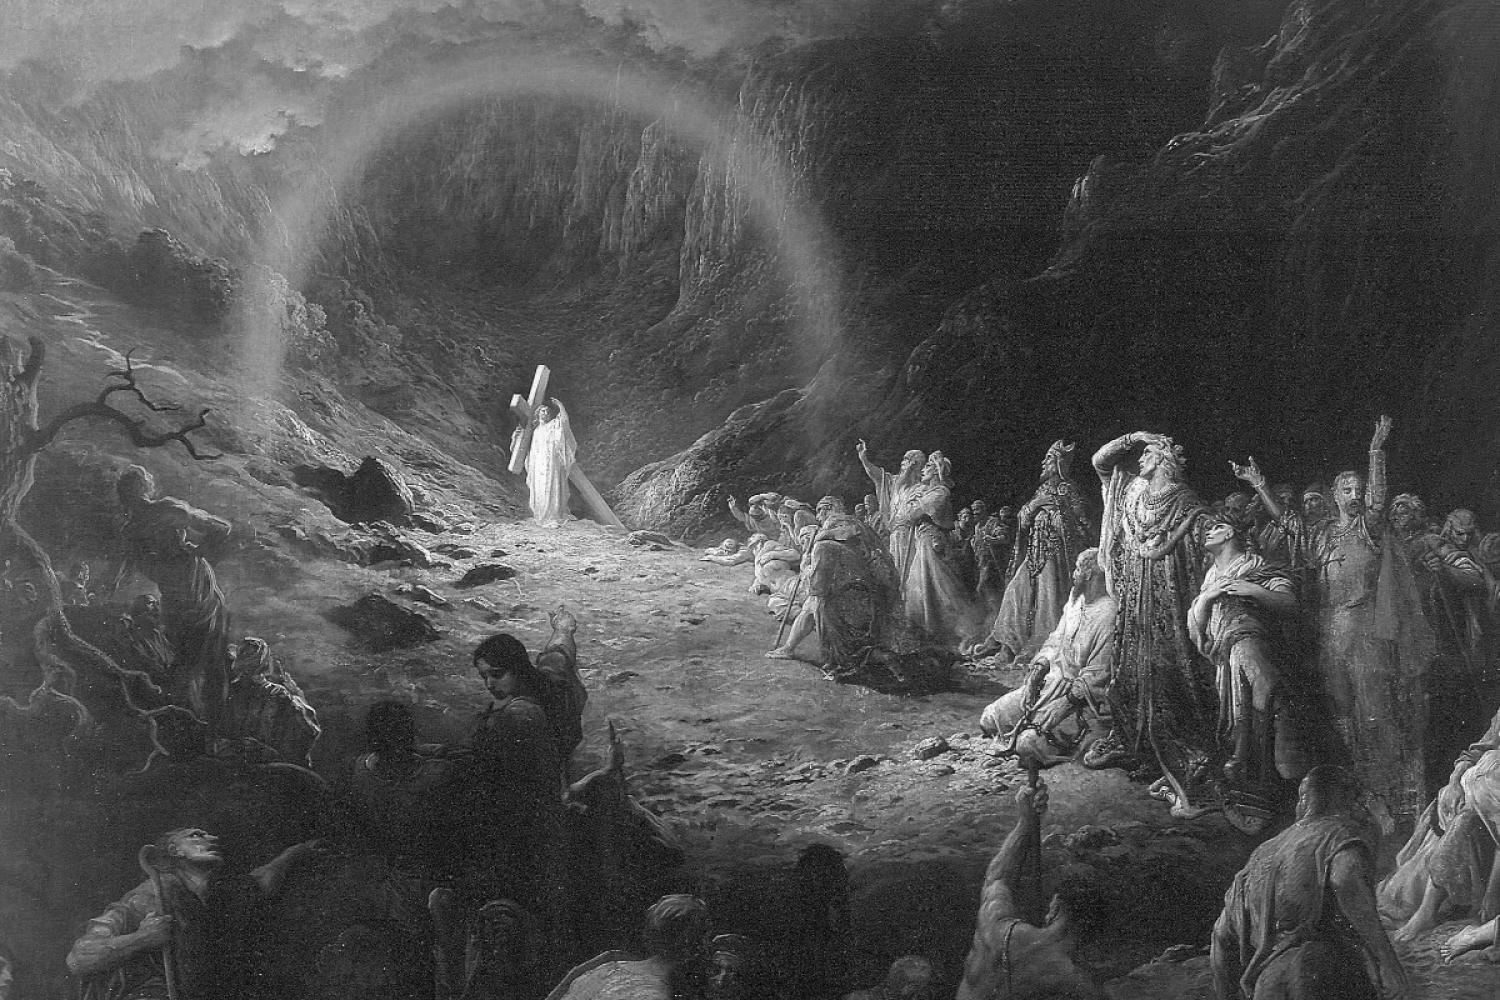 "The Valley of Death," by Gustave Dore